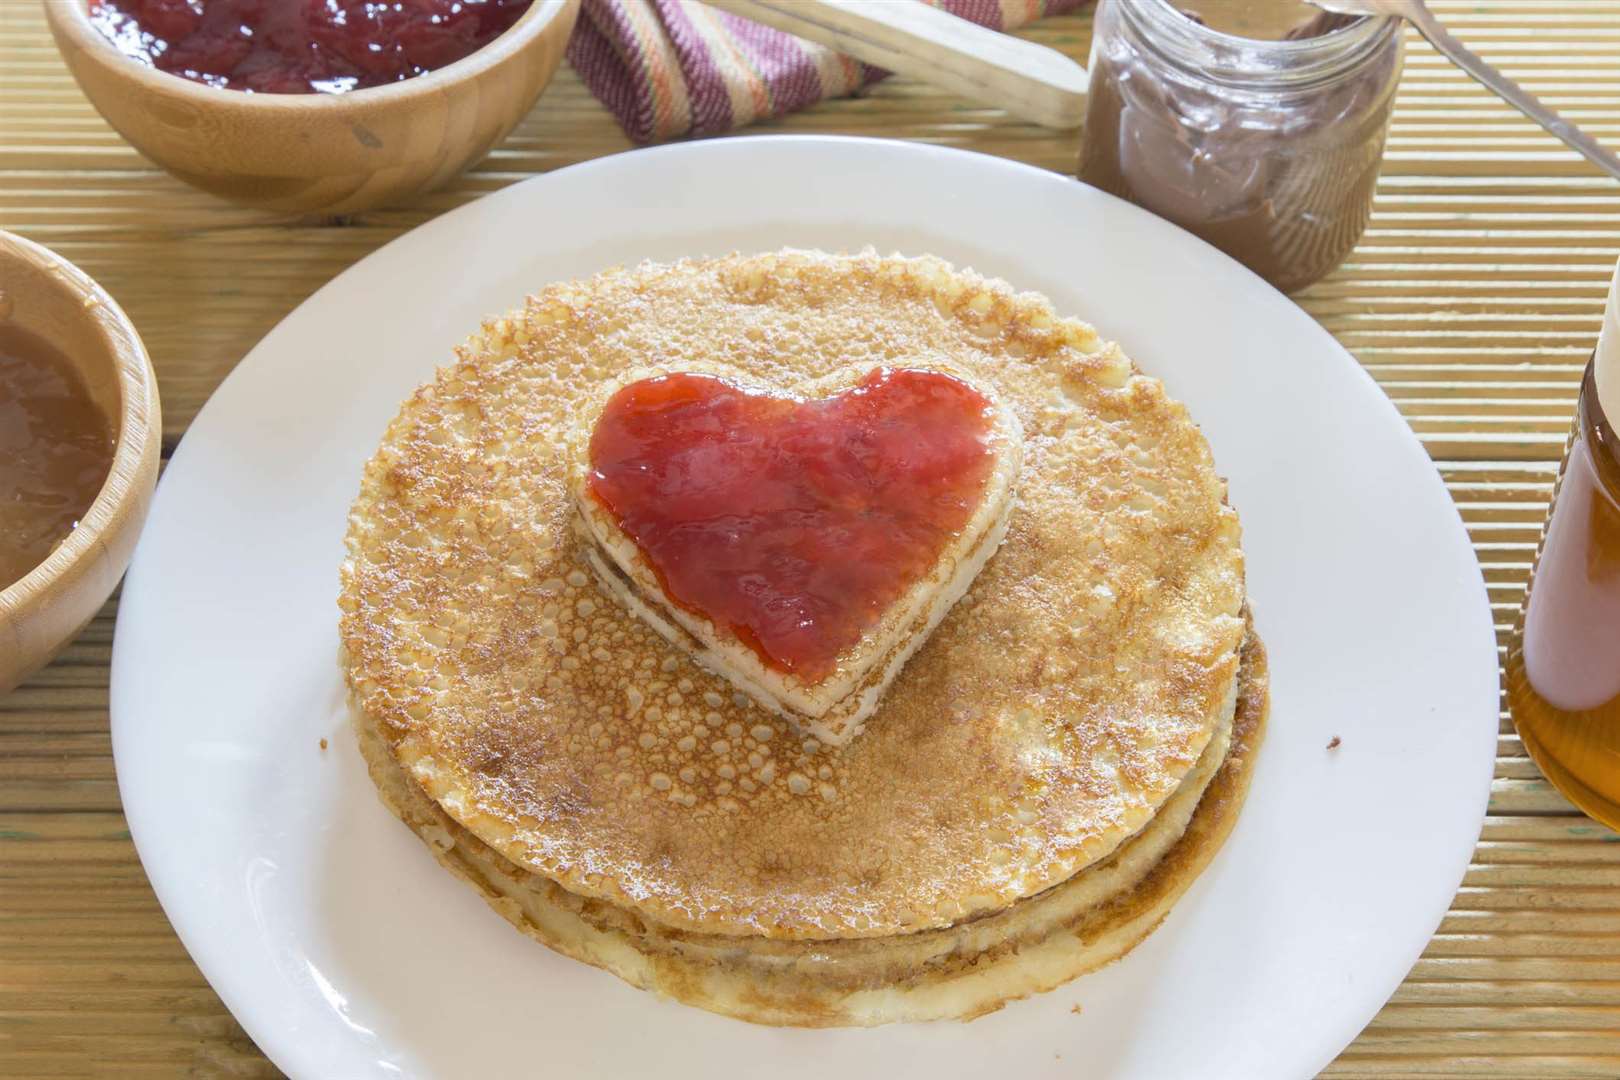 What topping do you like best on your pancakes?